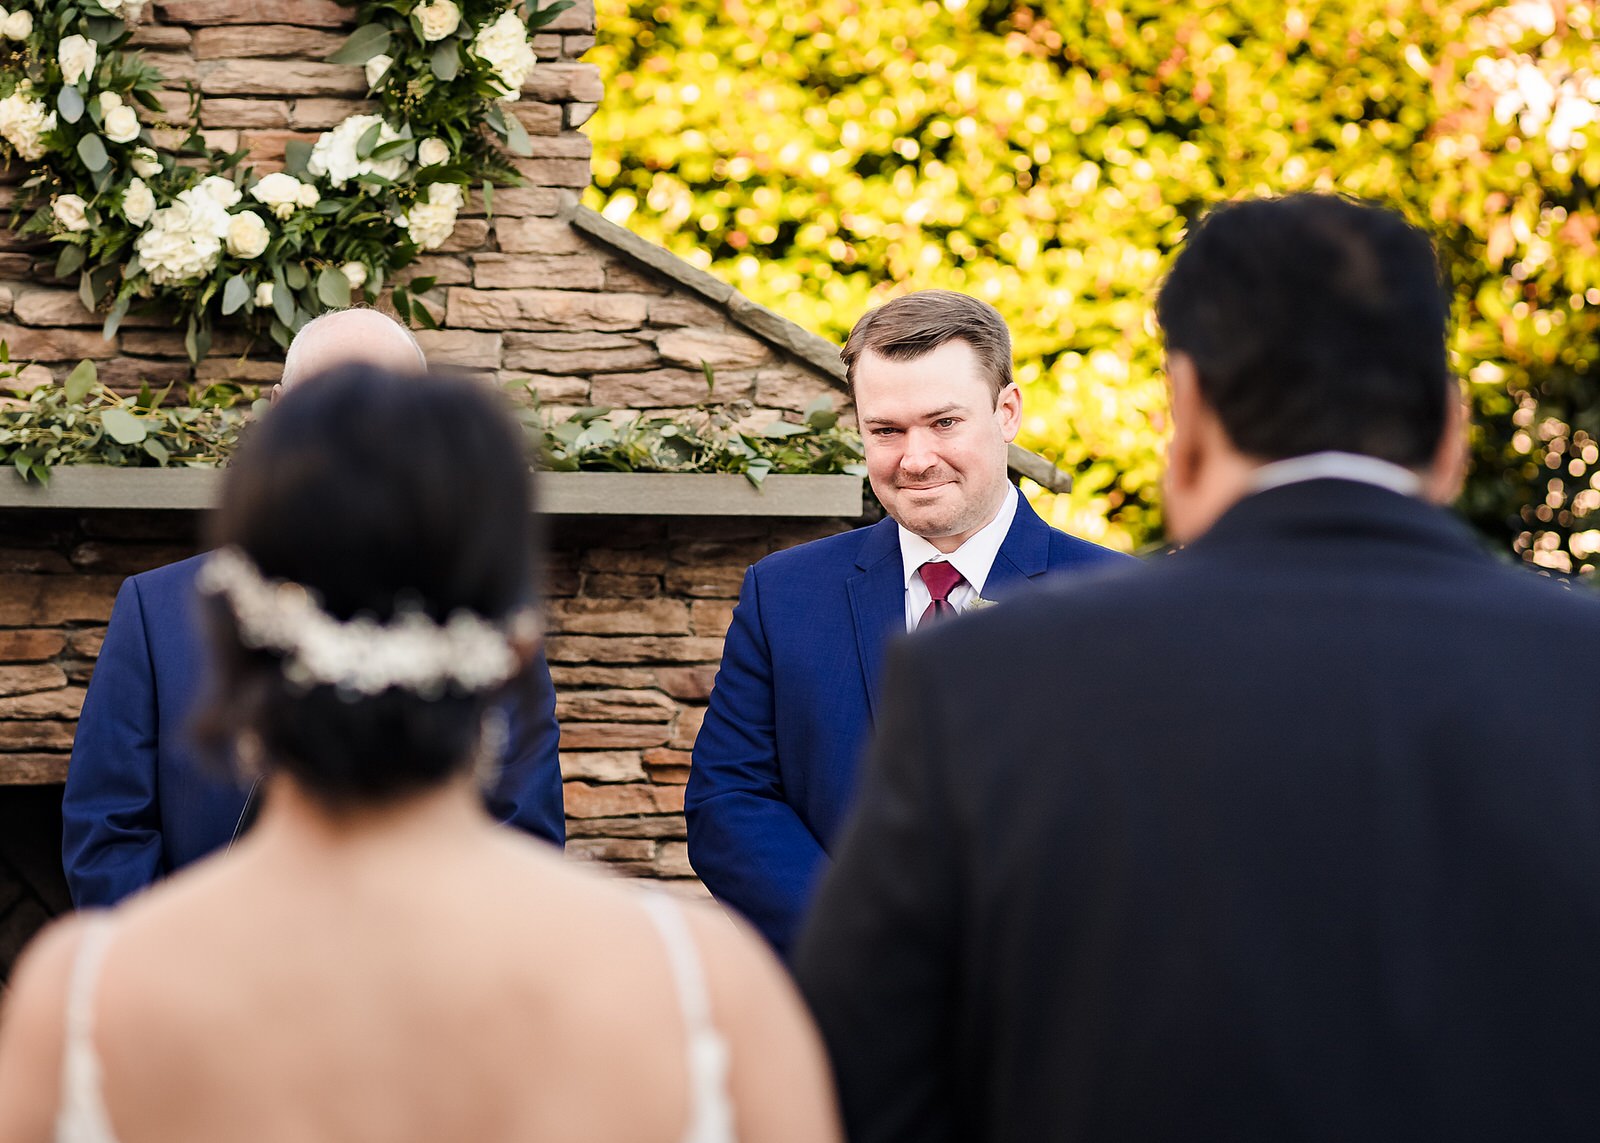 Don't you just love the groom's reaction to seeing the bride? And hers too!